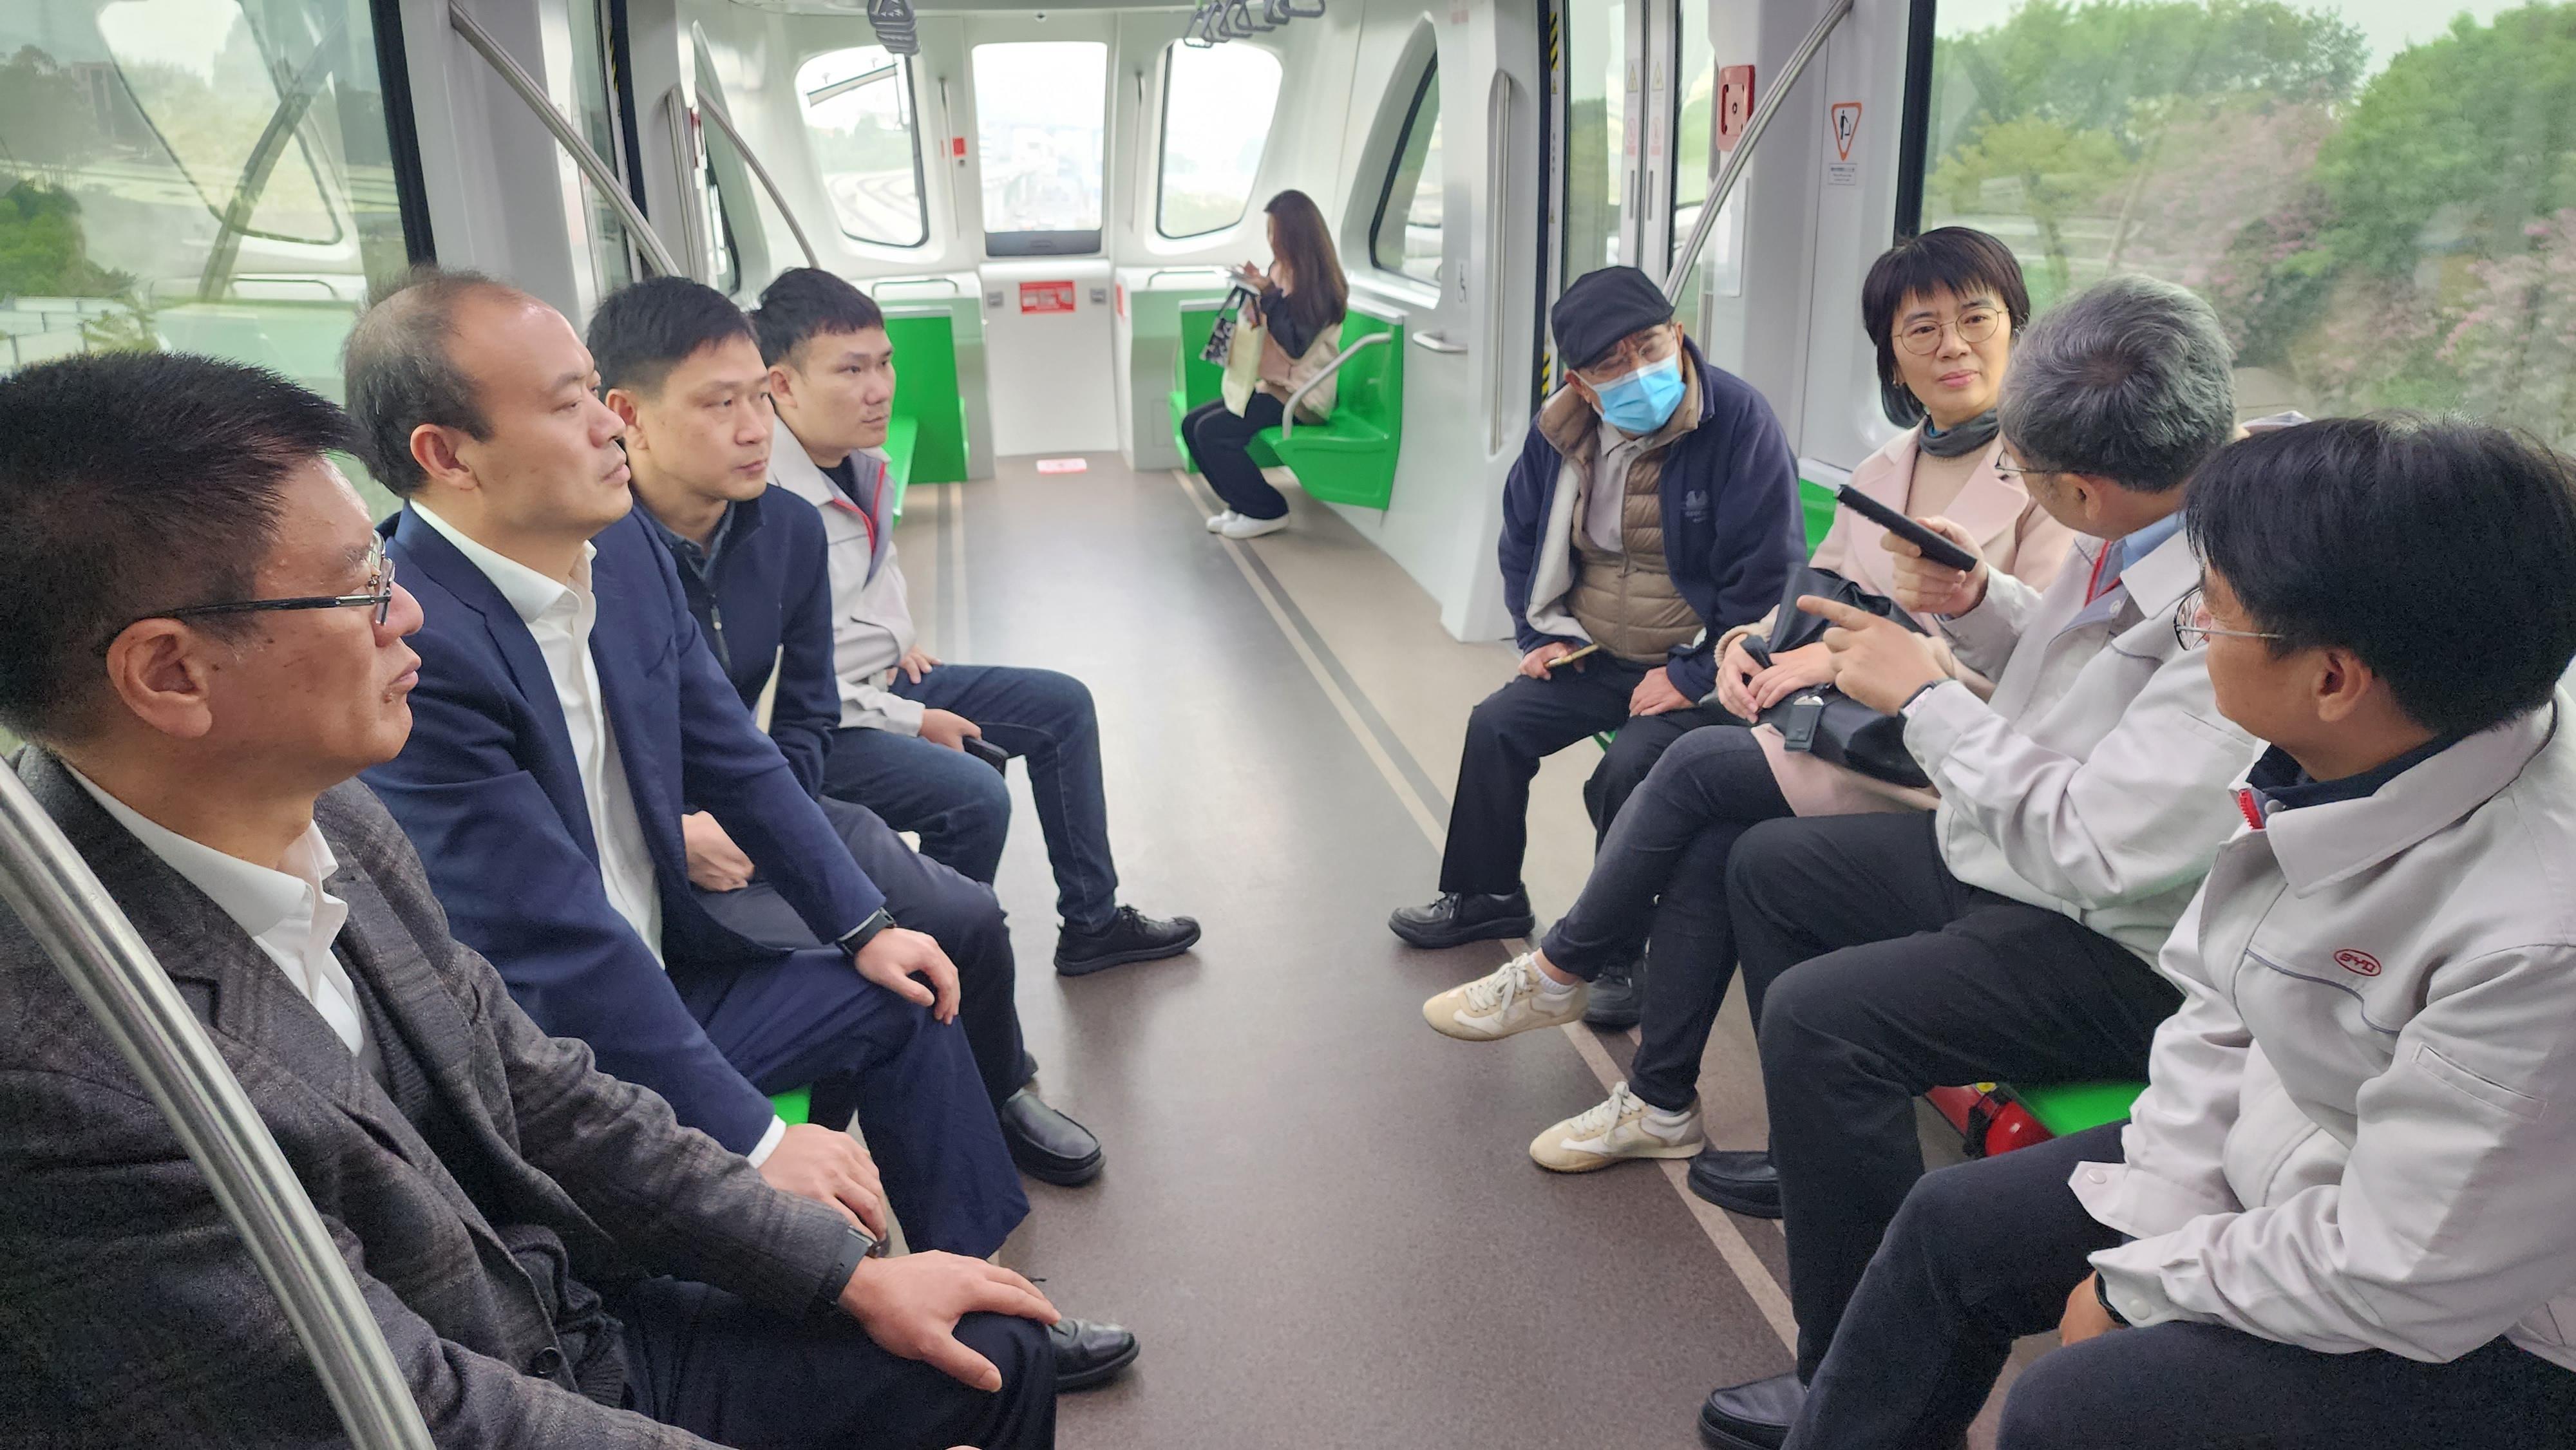 The Town Planning Board visited Guangzhou, Dongguan and Shenzhen from December 16 to 18 to better understand the prevailing urban planning and development in the Greater Bay Area. Photo shows the delegation riding the SkyShuttle, a new energy rail transit system developed by BYD Company Limited.